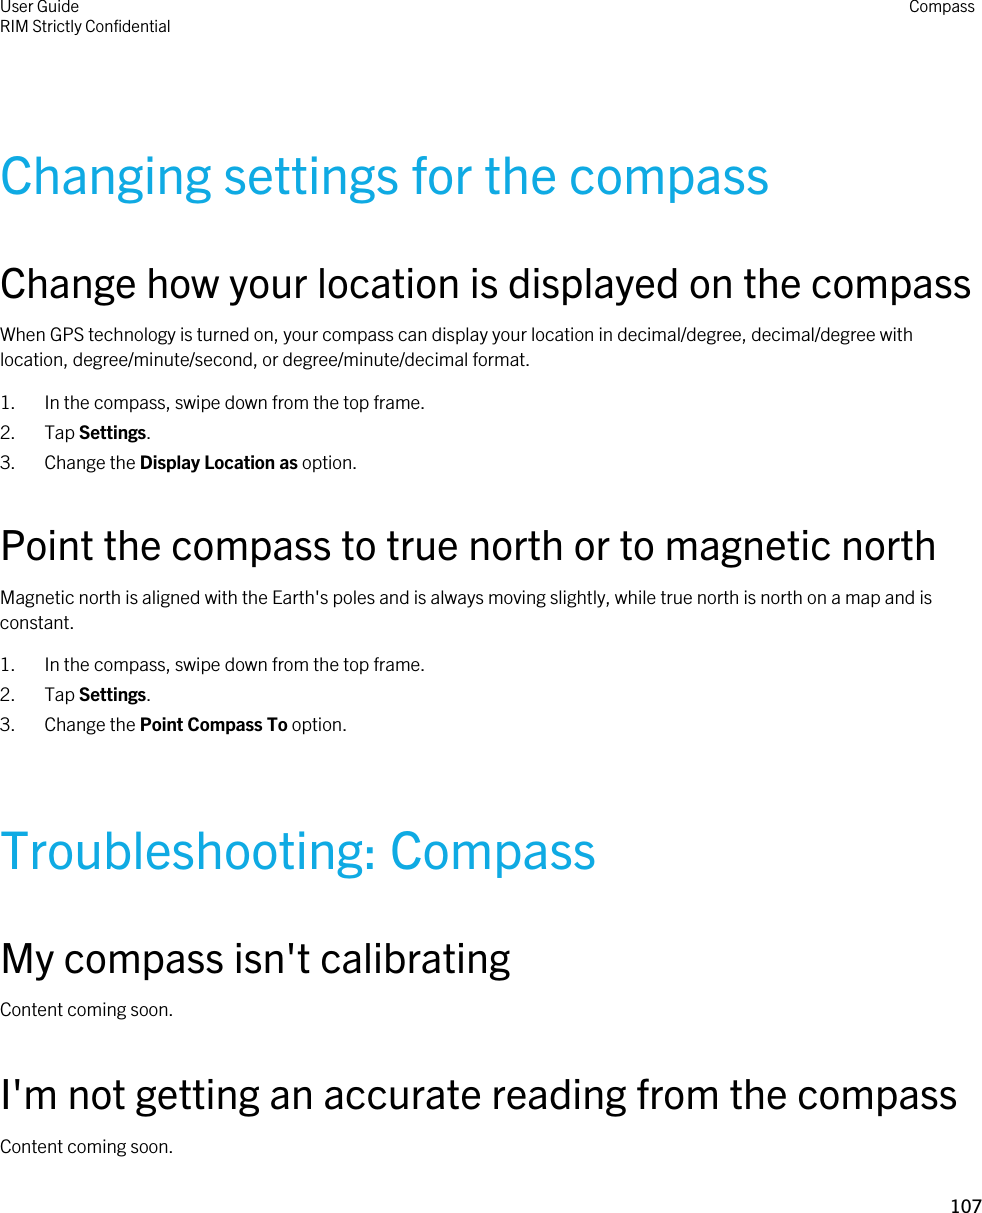 Changing settings for the compassChange how your location is displayed on the compassWhen GPS technology is turned on, your compass can display your location in decimal/degree, decimal/degree with location, degree/minute/second, or degree/minute/decimal format.1. In the compass, swipe down from the top frame.2. Tap Settings.3. Change the Display Location as option.Point the compass to true north or to magnetic northMagnetic north is aligned with the Earth&apos;s poles and is always moving slightly, while true north is north on a map and is constant.1. In the compass, swipe down from the top frame.2. Tap Settings.3. Change the Point Compass To option.Troubleshooting: CompassMy compass isn&apos;t calibratingContent coming soon.I&apos;m not getting an accurate reading from the compassContent coming soon.User GuideRIM Strictly Confidential Compass107 